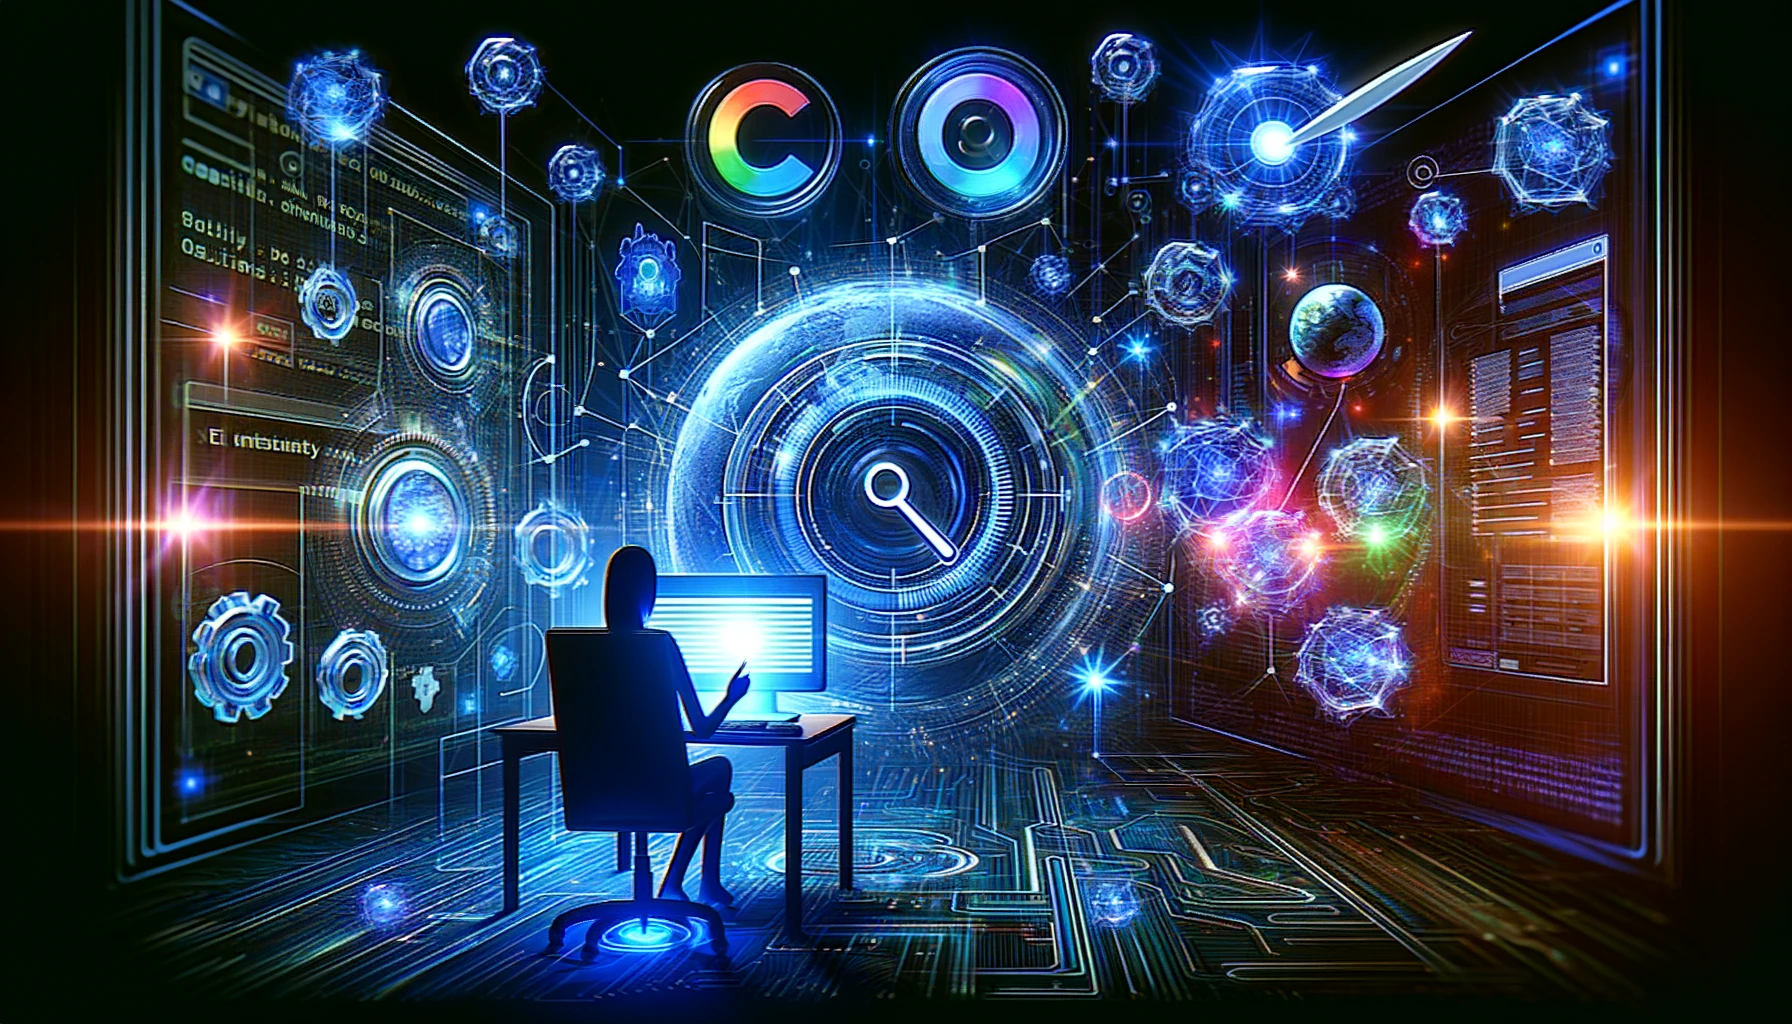 A wide image for a blog article's body, depicting a person engaging with a futuristic SEO interface, with interactive elements and analytics data visualized in a digital space, using a dark color scheme with blue and neon highlights.